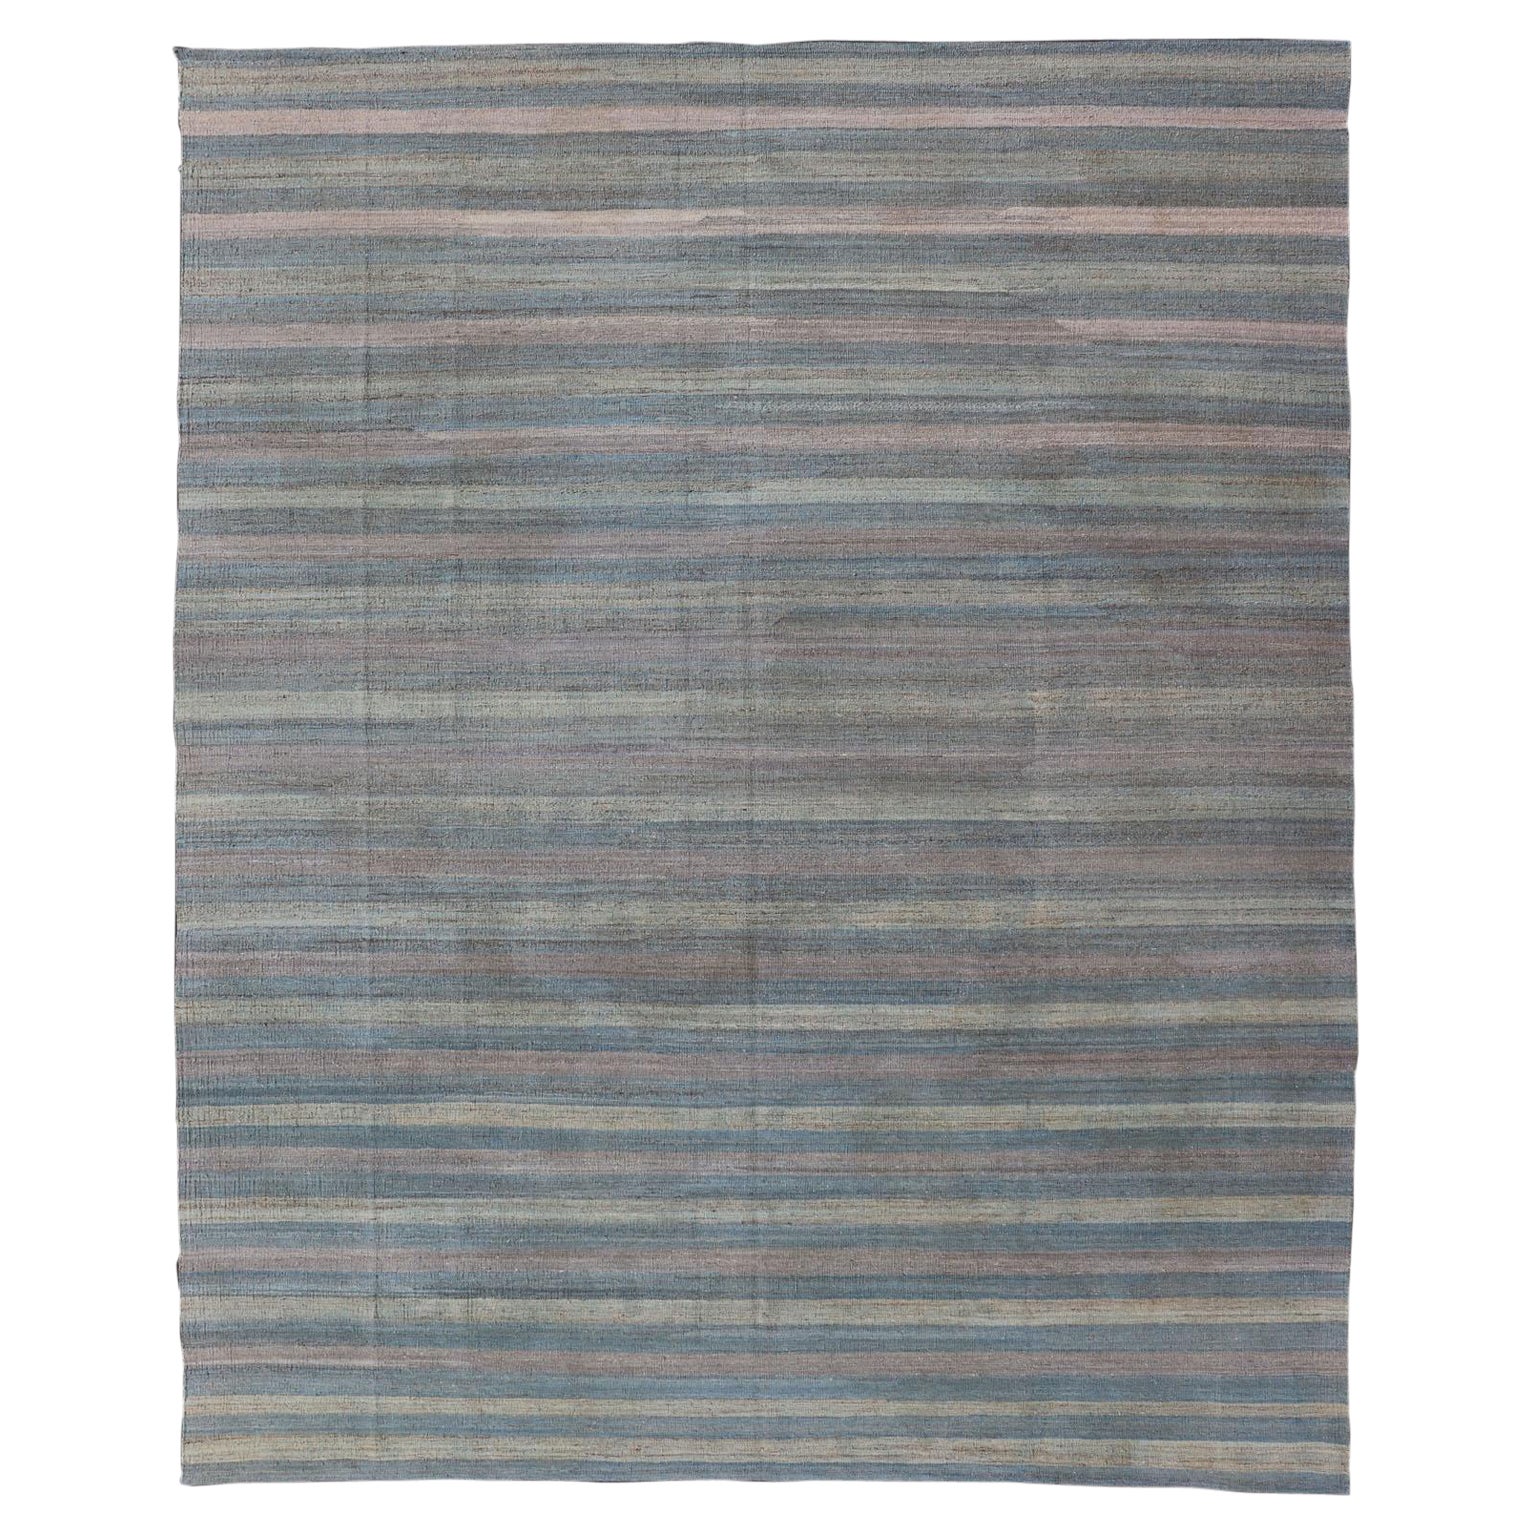 Large Afghanistan Kilim Modern with Stripes in Shade of Light Green